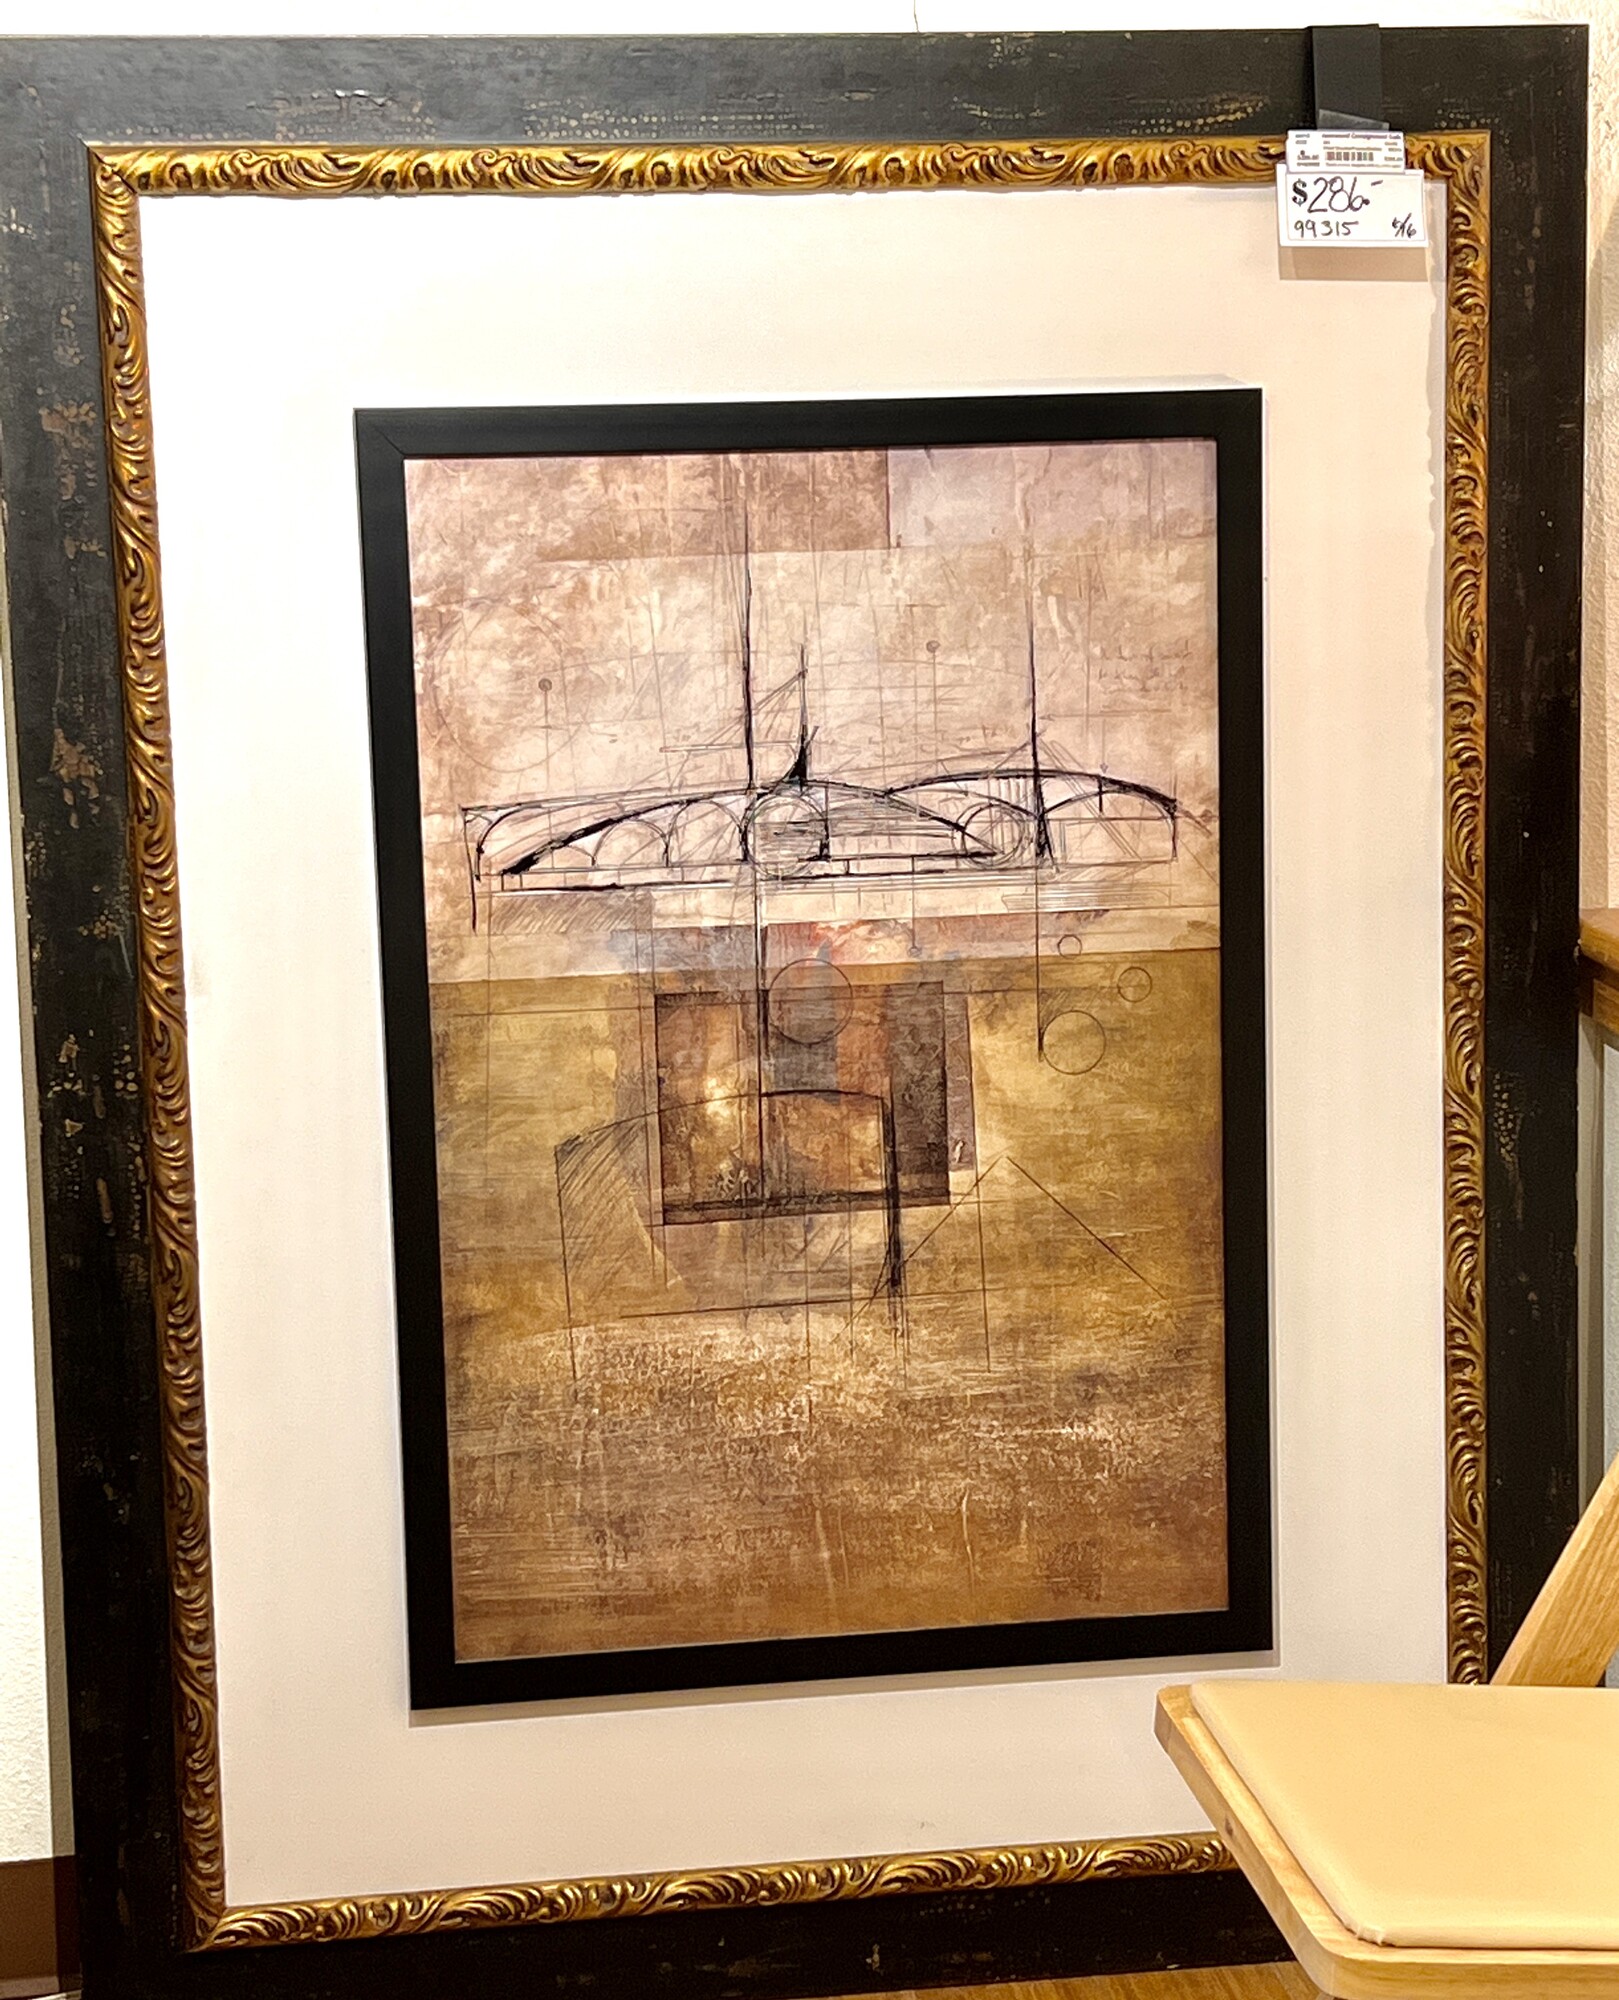 Huge Double Framed Abstract
Size: 44x56